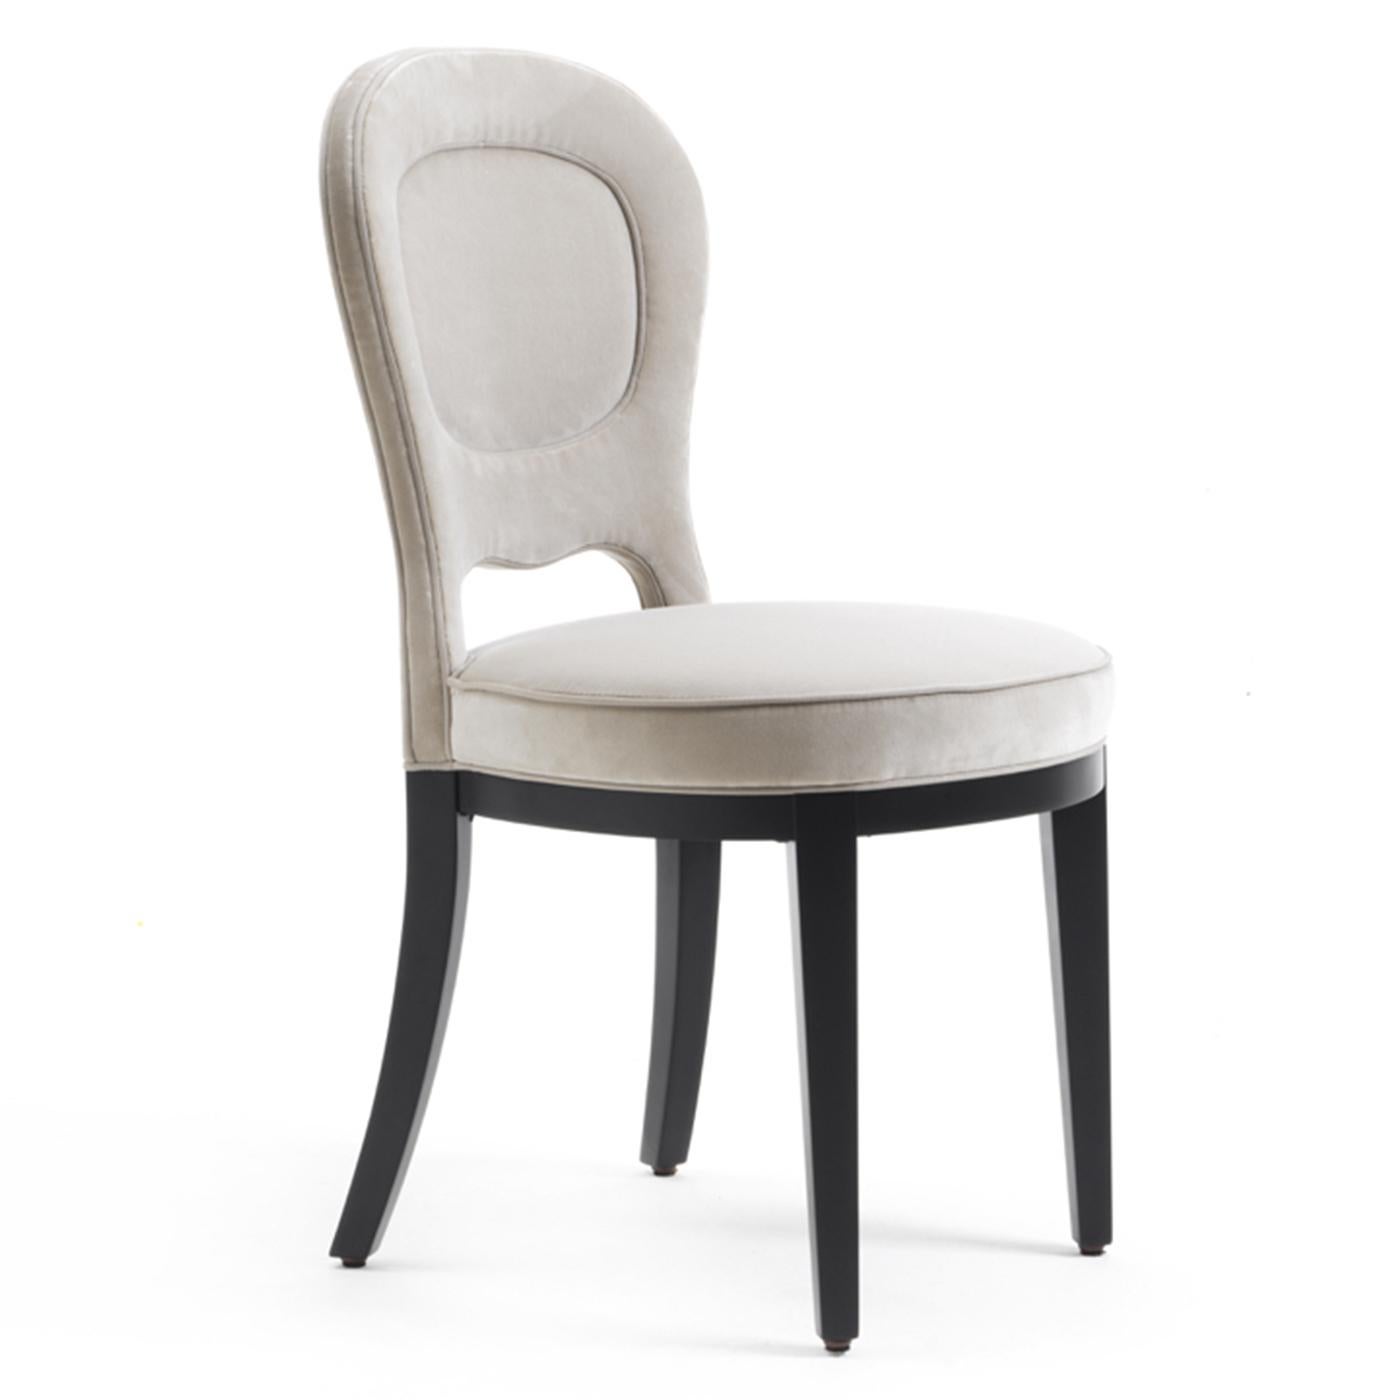 Part of the Gilda collection, this elegant chair is a versatile addition to any home, either in a classic dining room or behind a modern desk, this chair will imbue the space with subtle charm and timeless allure. The visible structure is in solid